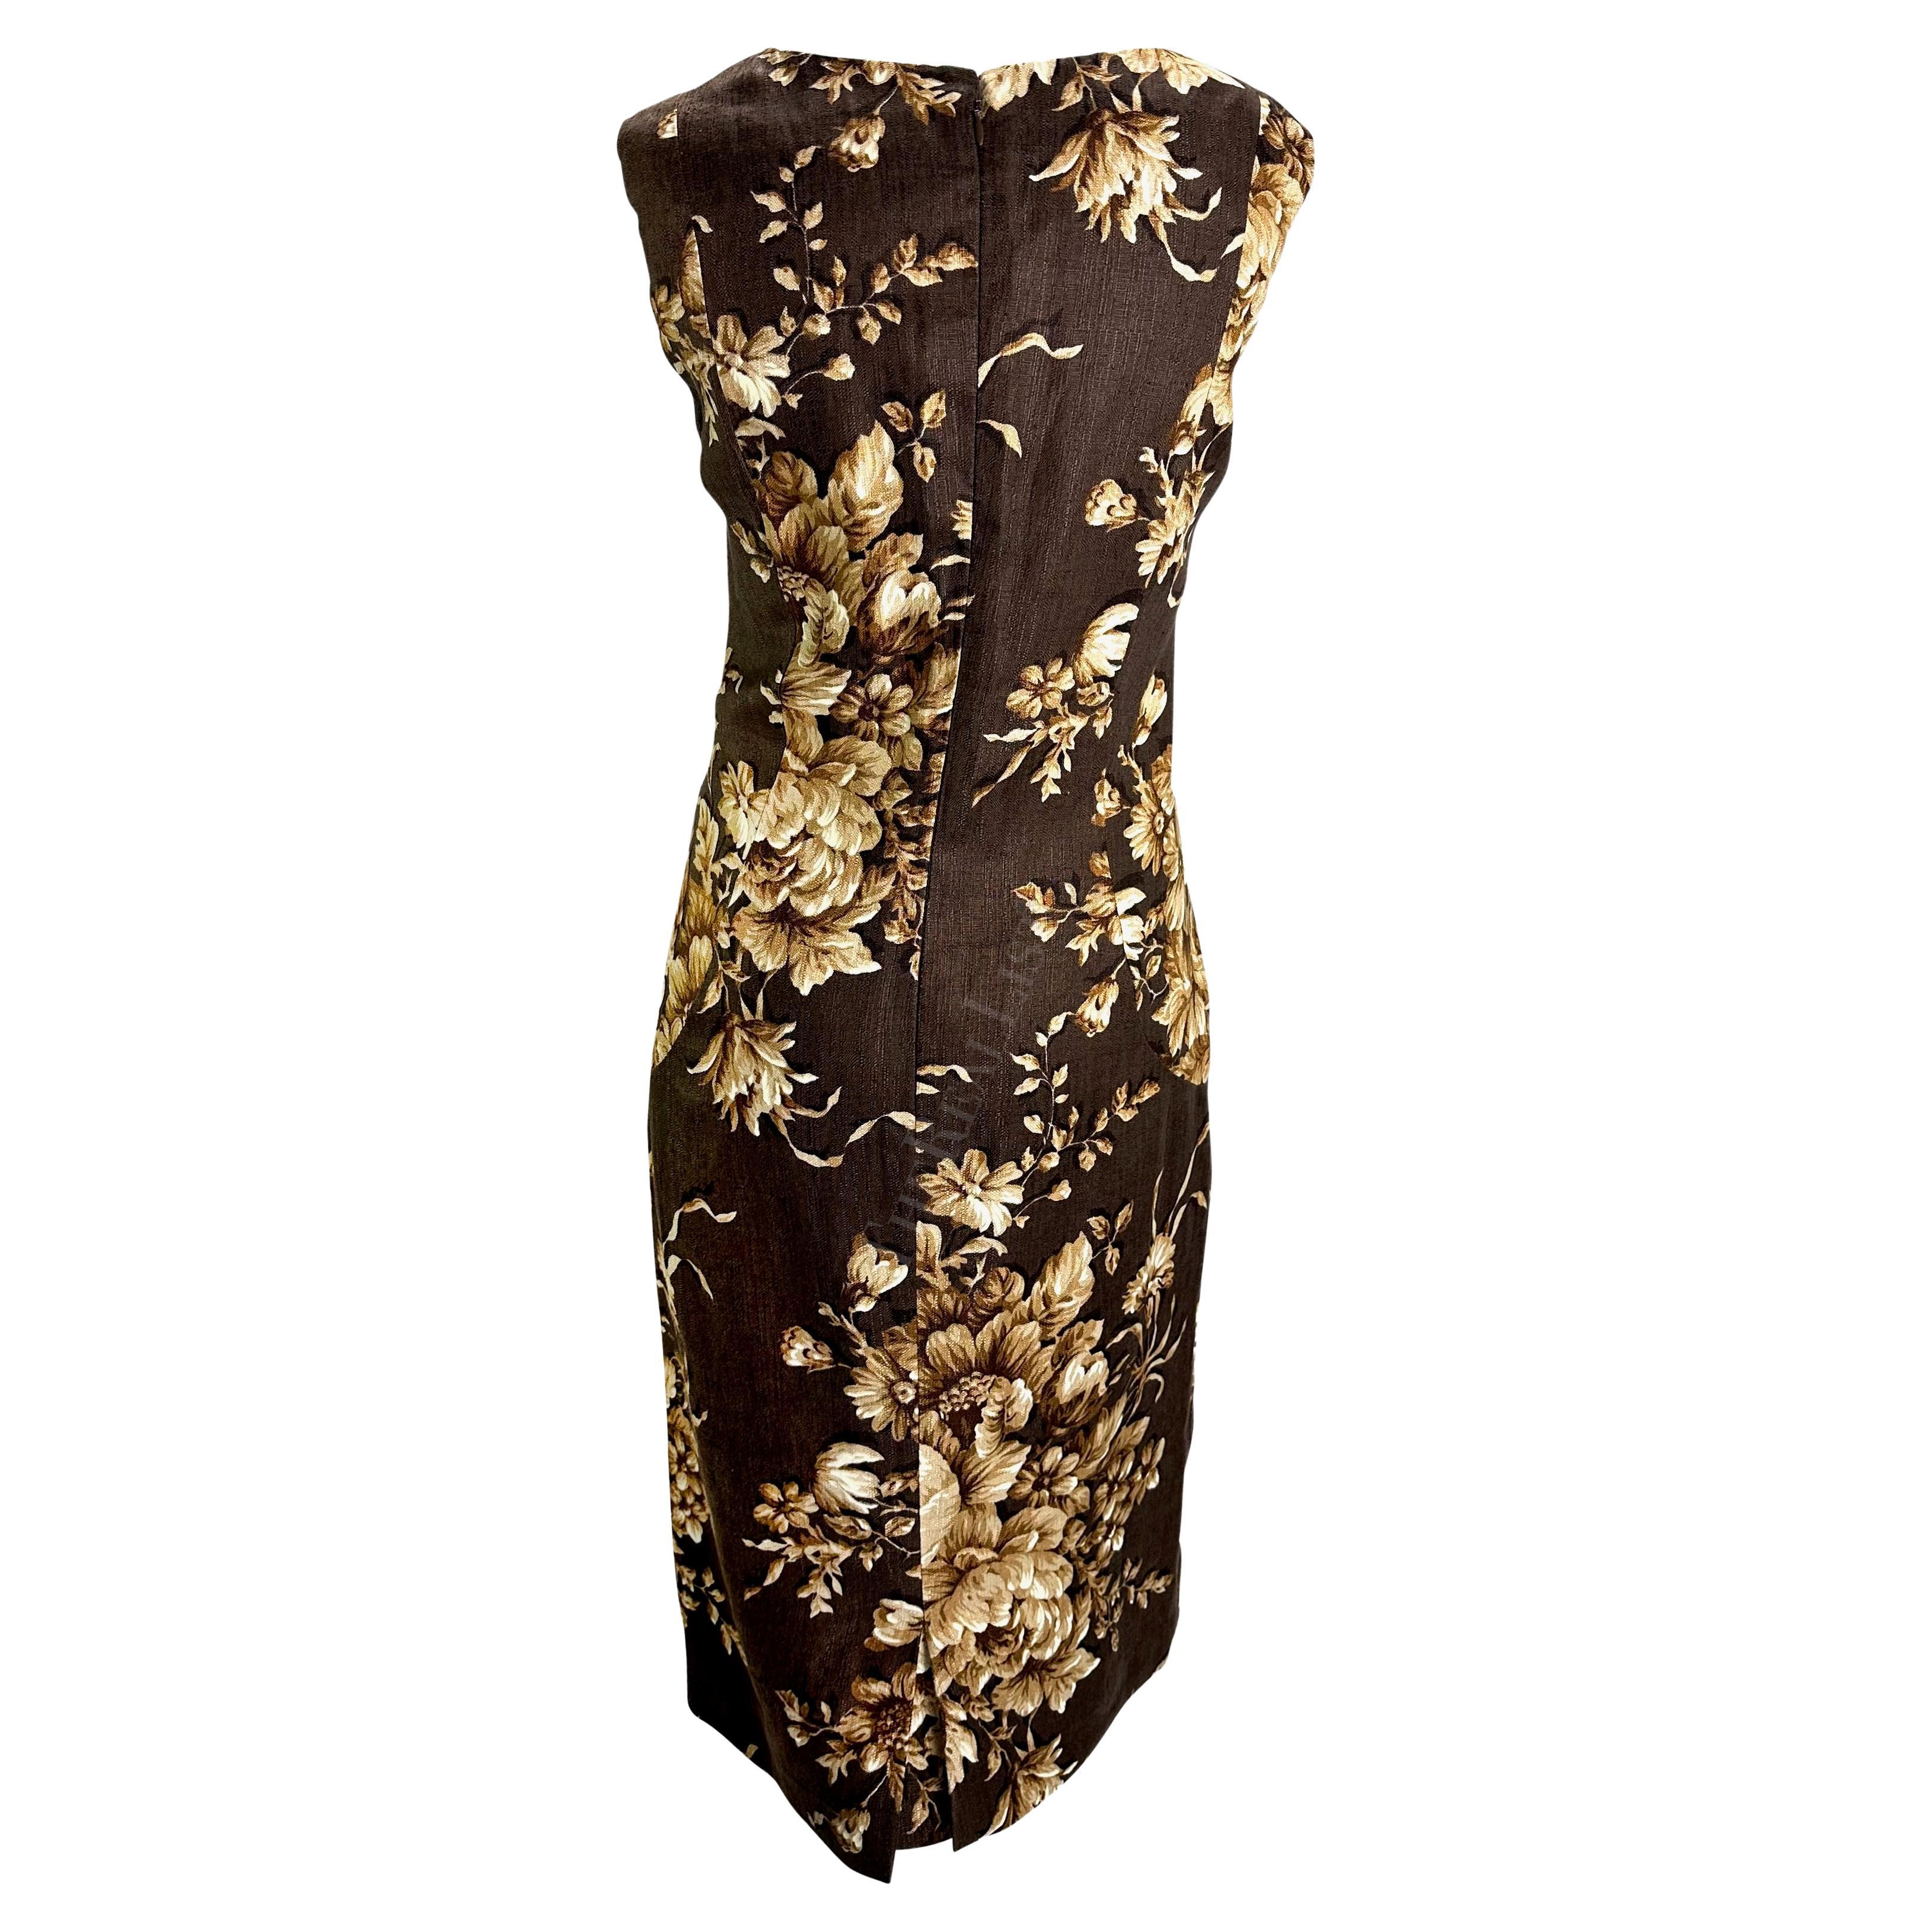 S/S 1997 Dolce & Gabbana Runway Brown Beige Floral Sleeveless Dress For Sale 1